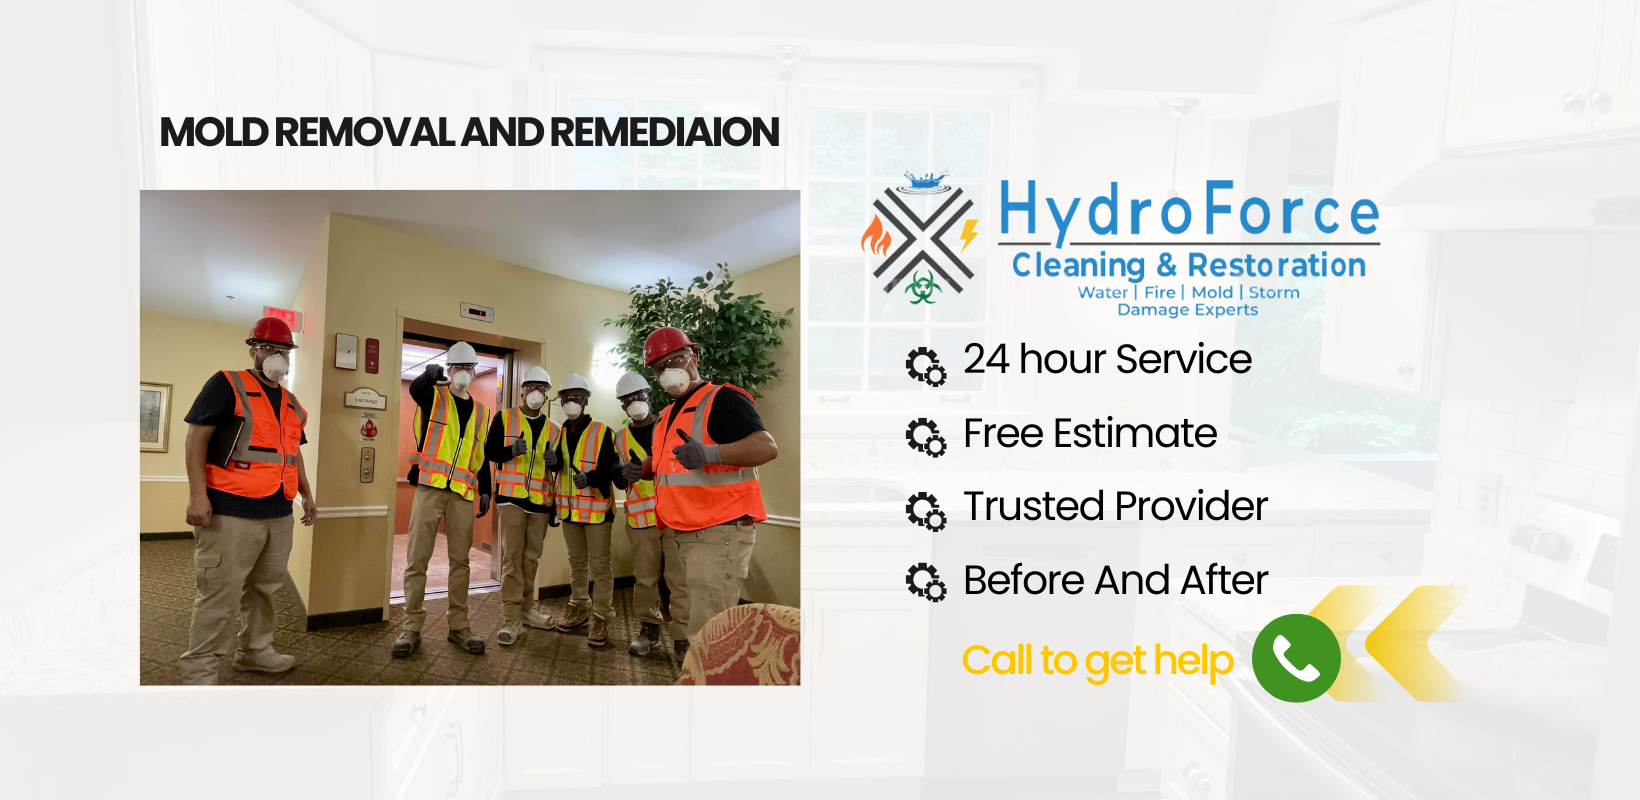 Mold Removal and Remediation - HydroForce Cleaning & Restoration